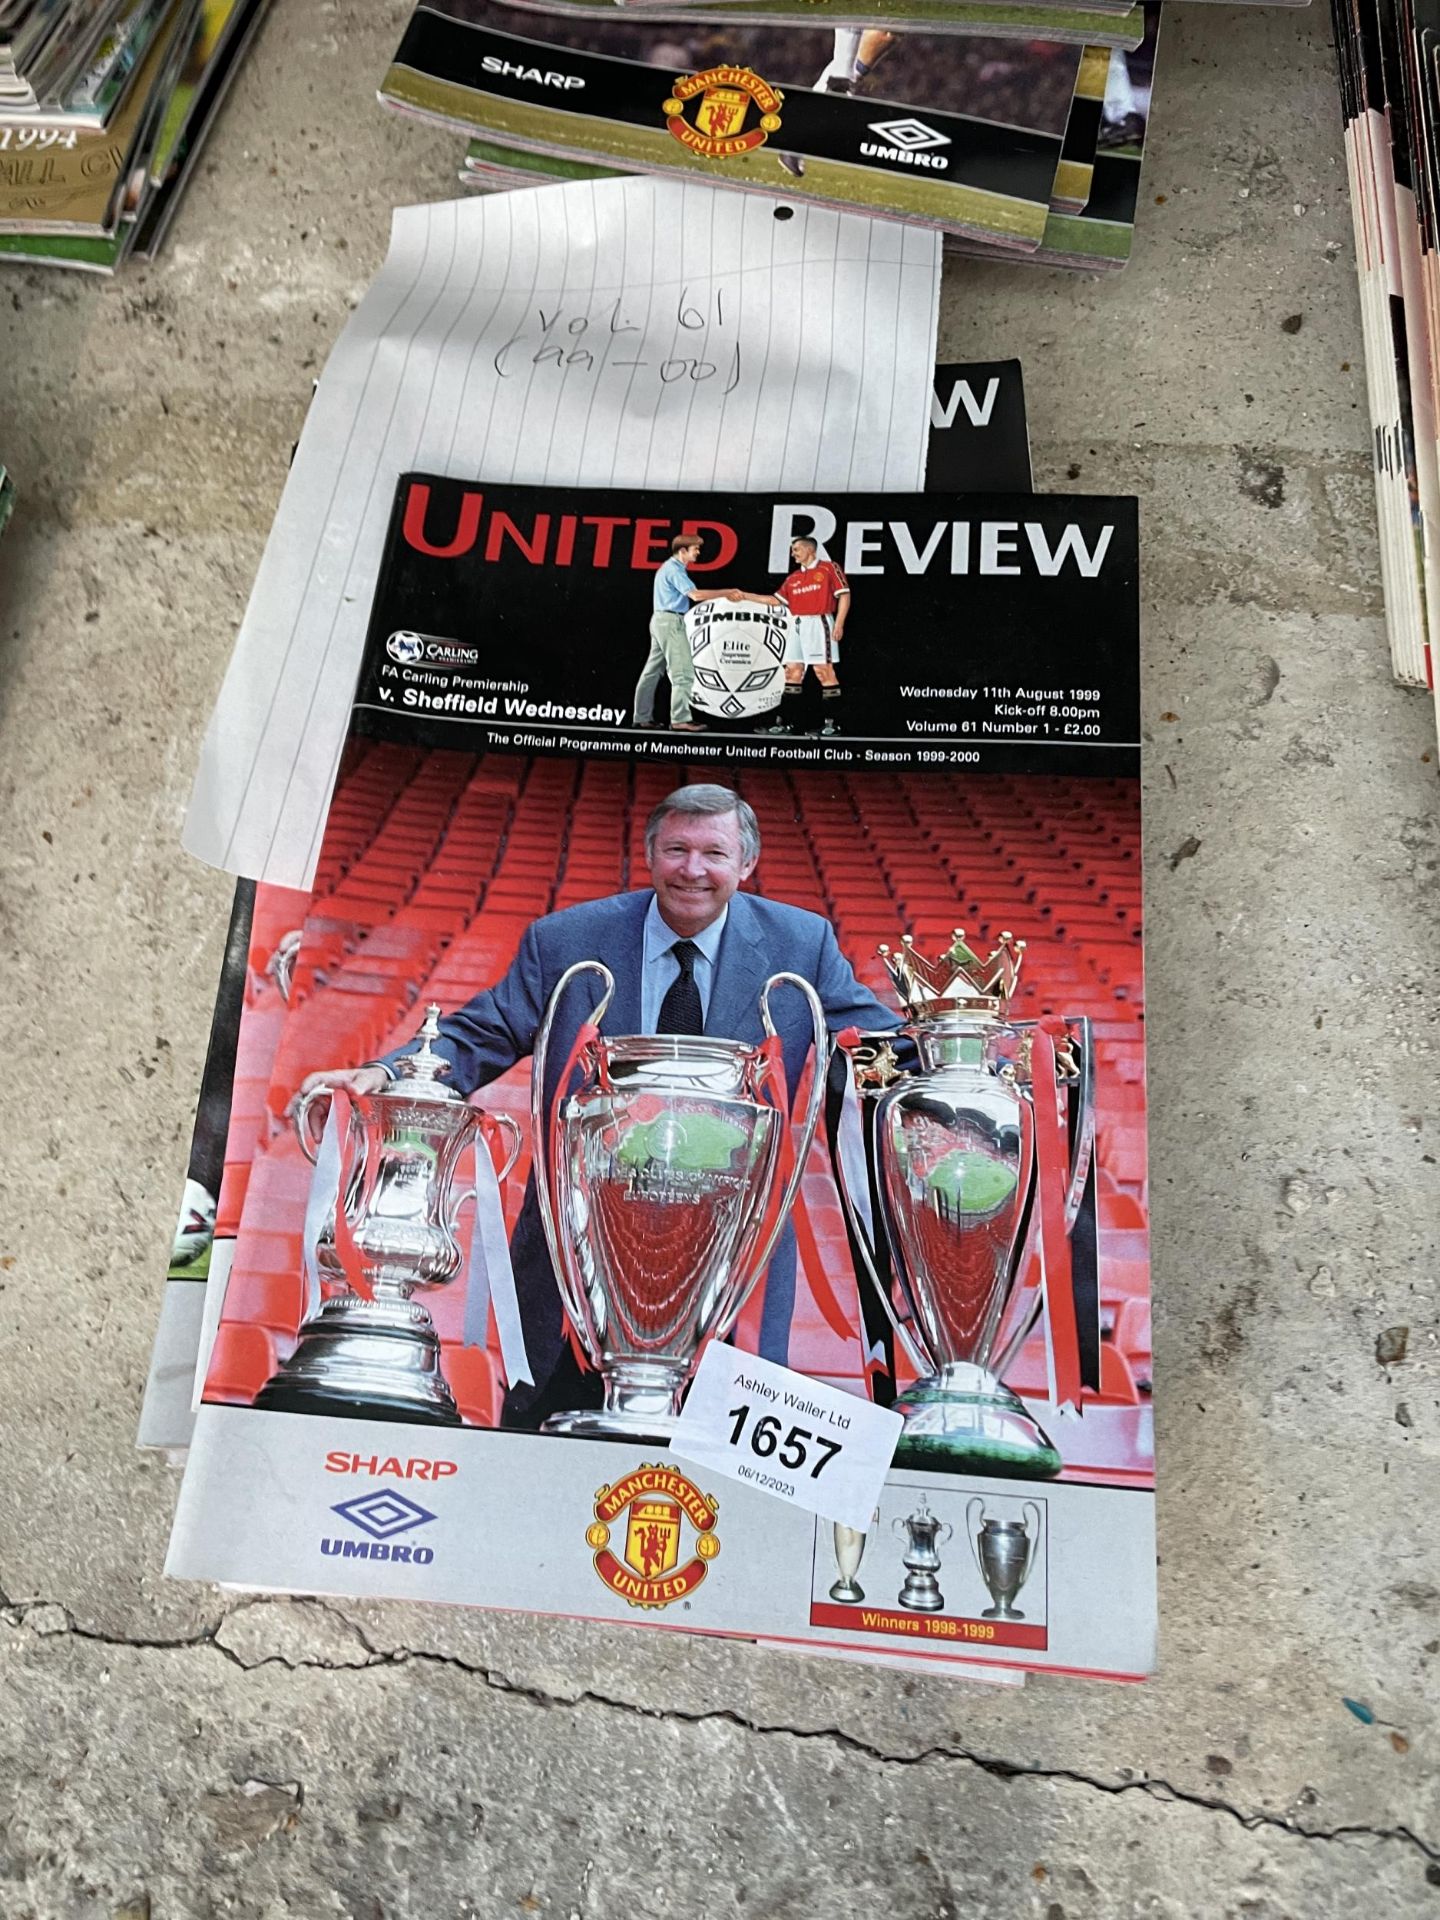 A PART COMPLETE SET OF MANCHESTER UNITED PROGRAMMES FROM THE 1999-2000 SEASON